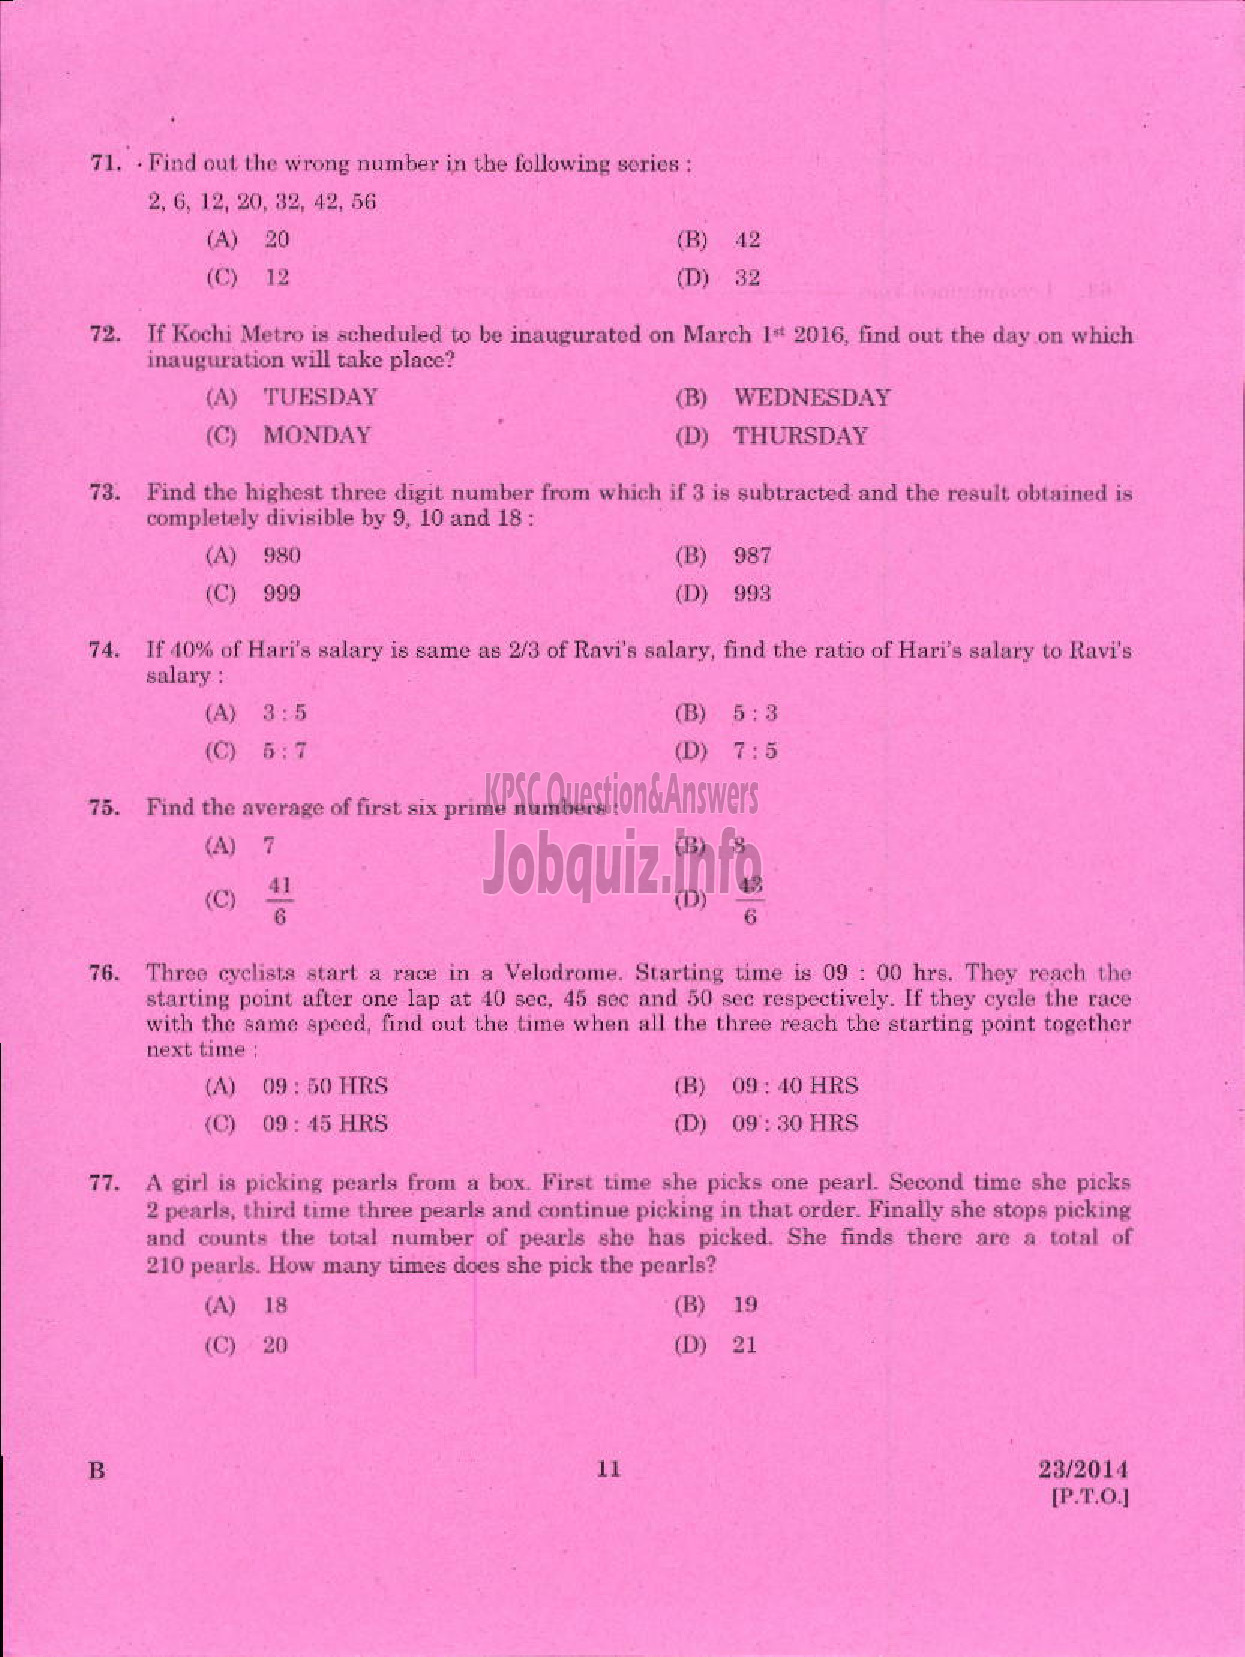 Kerala PSC Question Paper - EXCISE GUARD/WOMAN GUARD SR FOR SC/ST ONLY EXCISE PLKD TSR-9